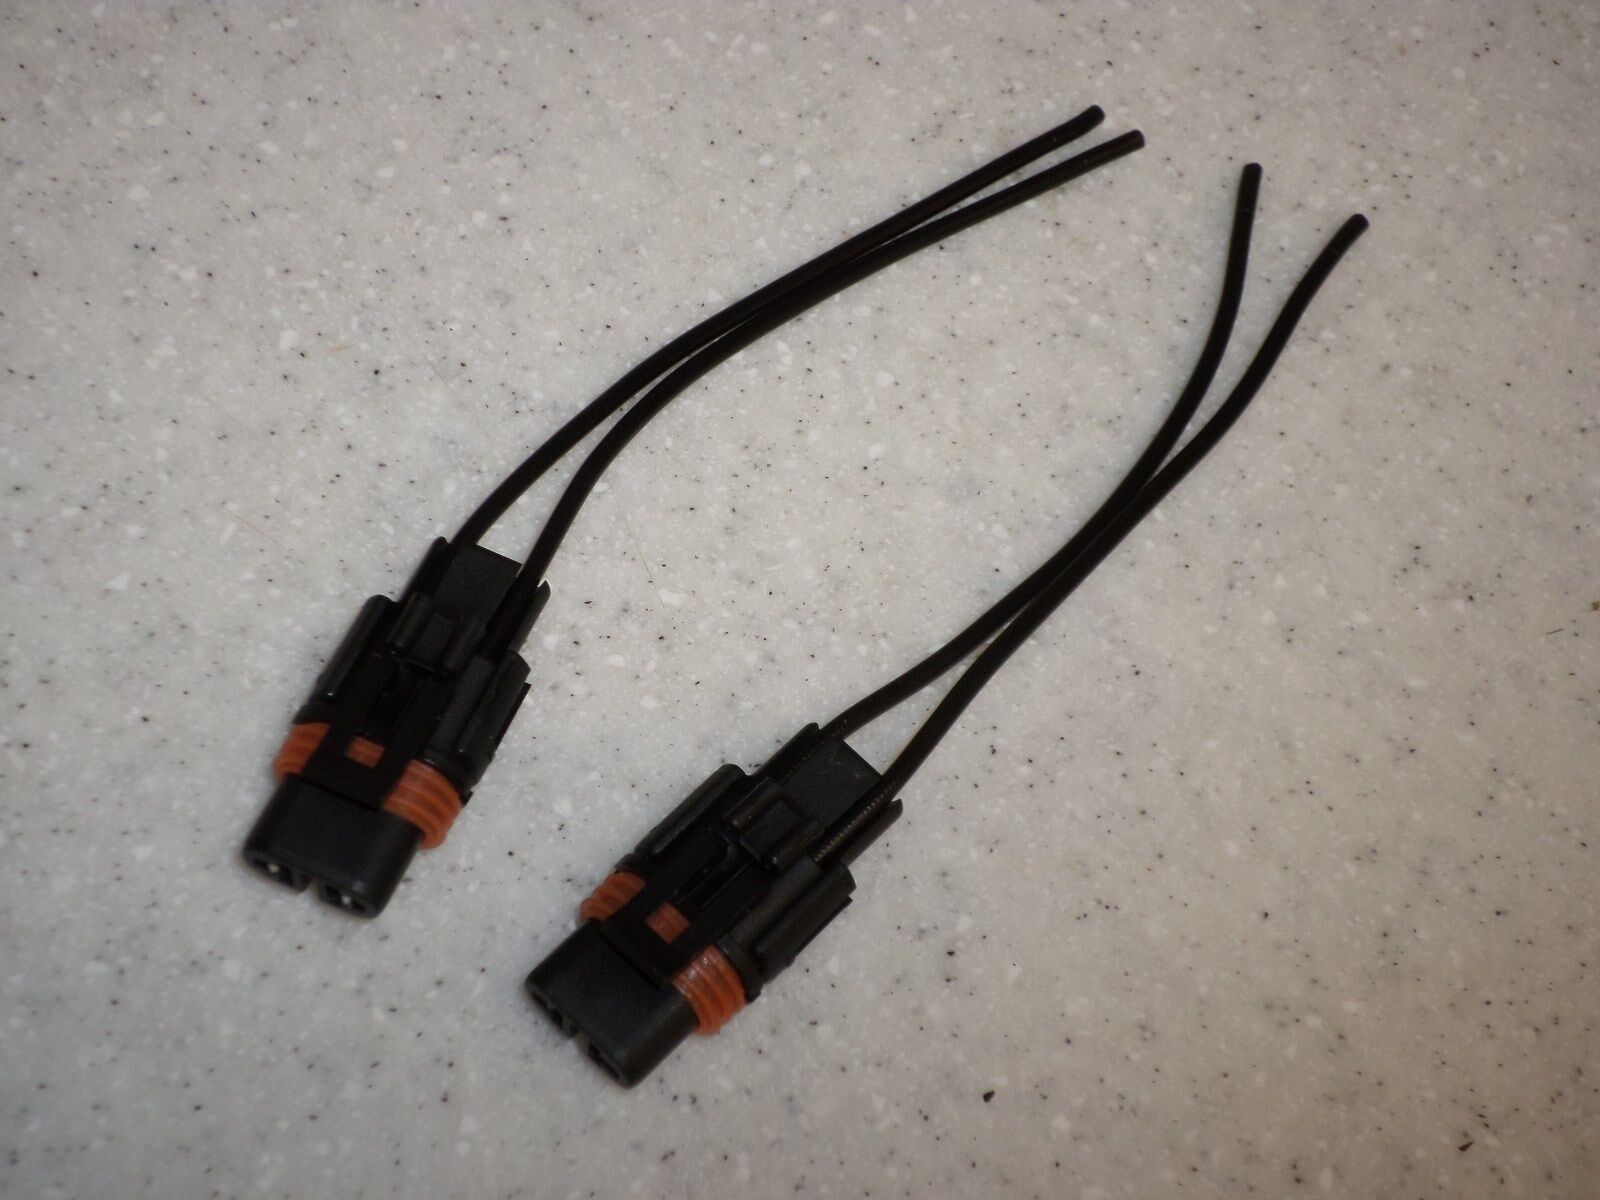 94 04 Mustang Pair FOG LIGHT WIRING PIGTAILS connectors Ford GT 5.0 4.6 stang